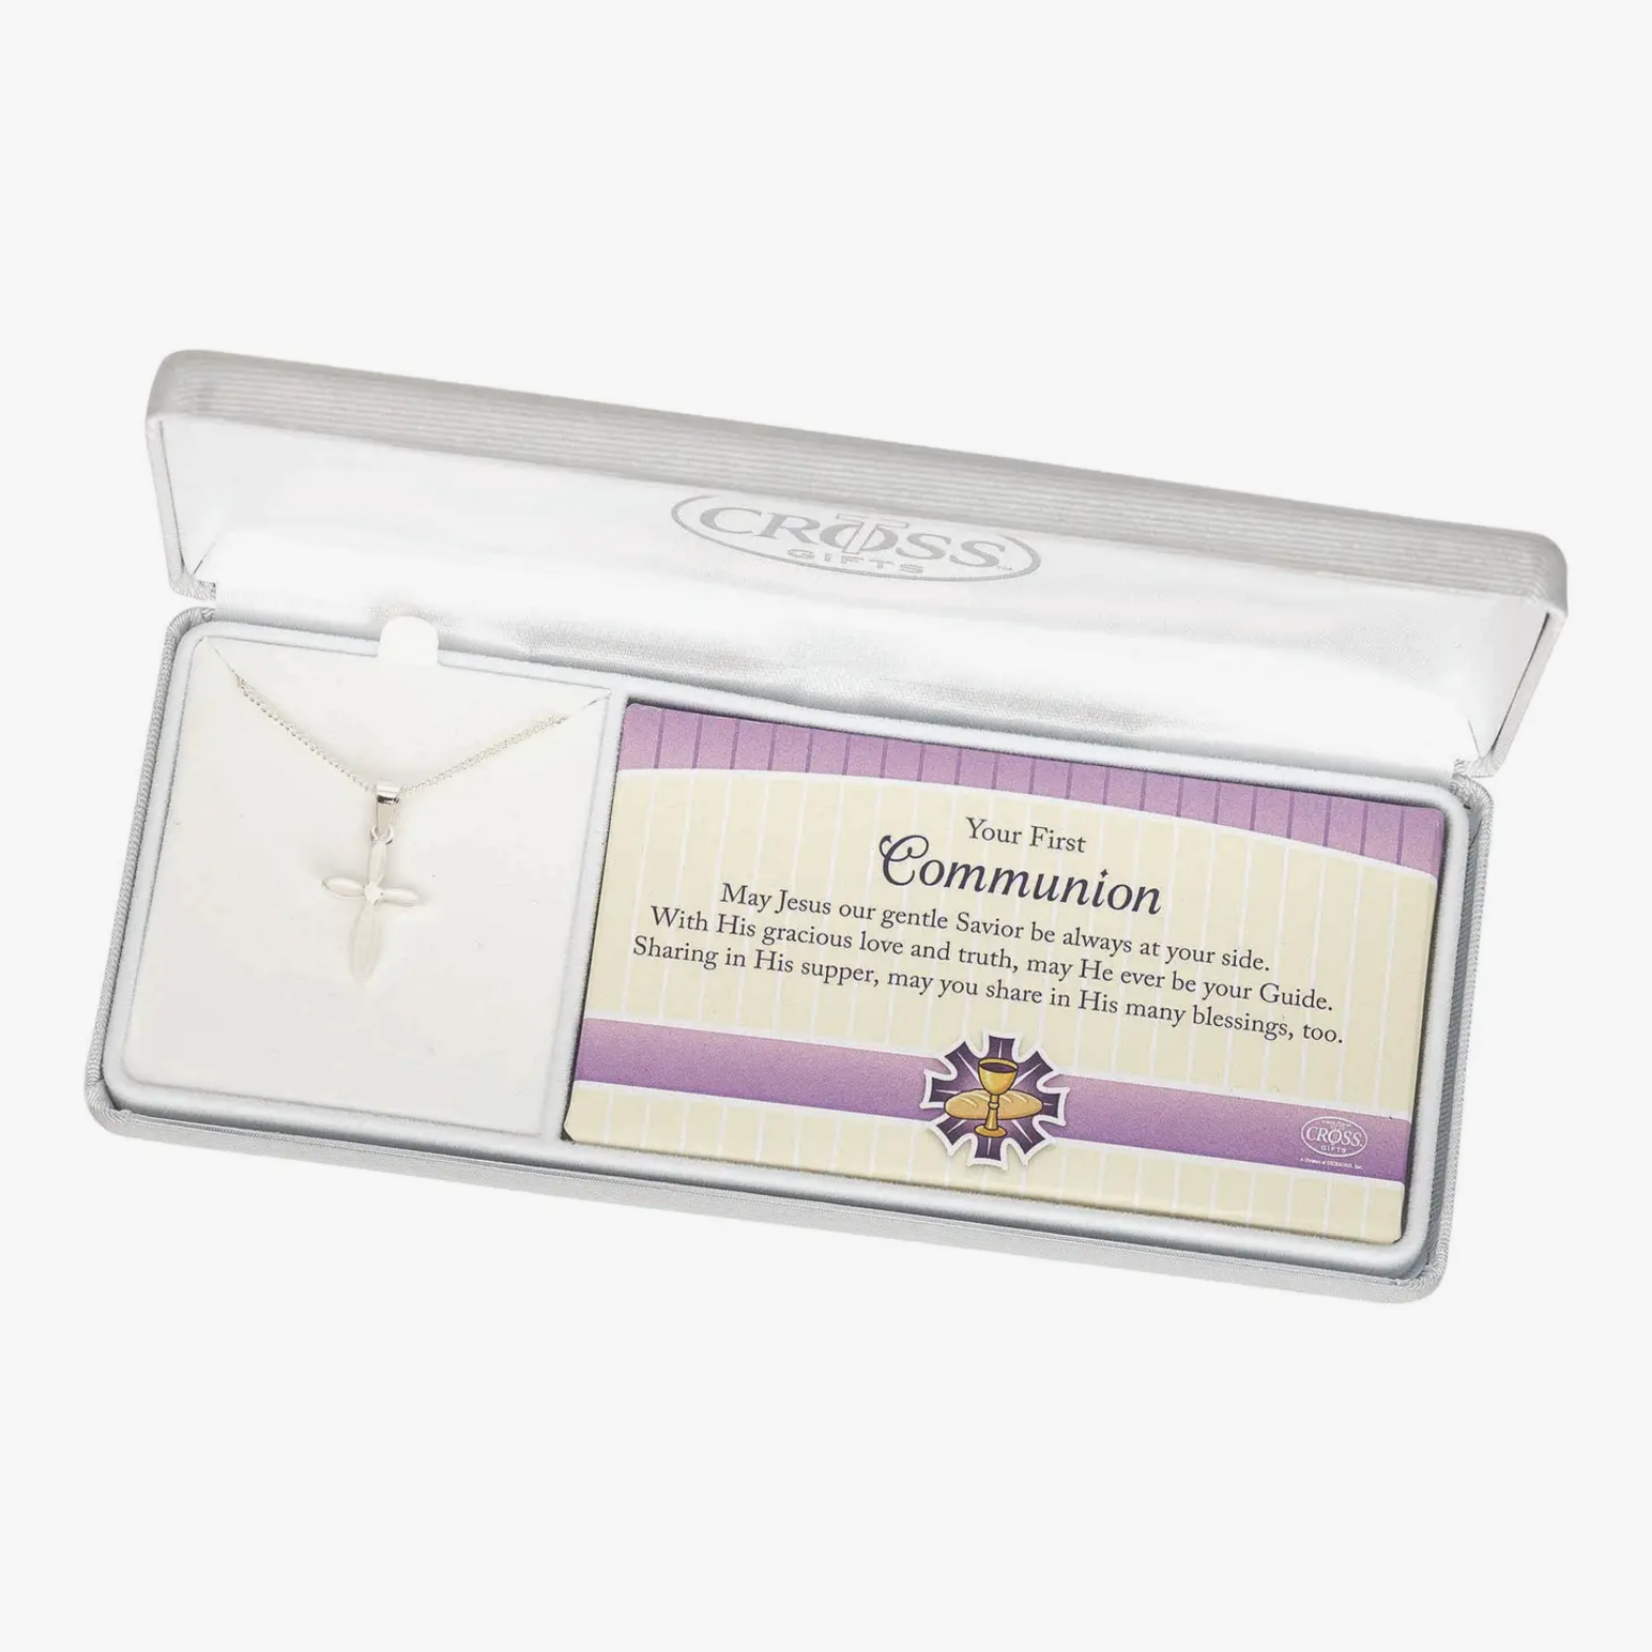 DICKSONS 1ST COMMUNION SILVER PLATED PETAL CROSS NECKLACE